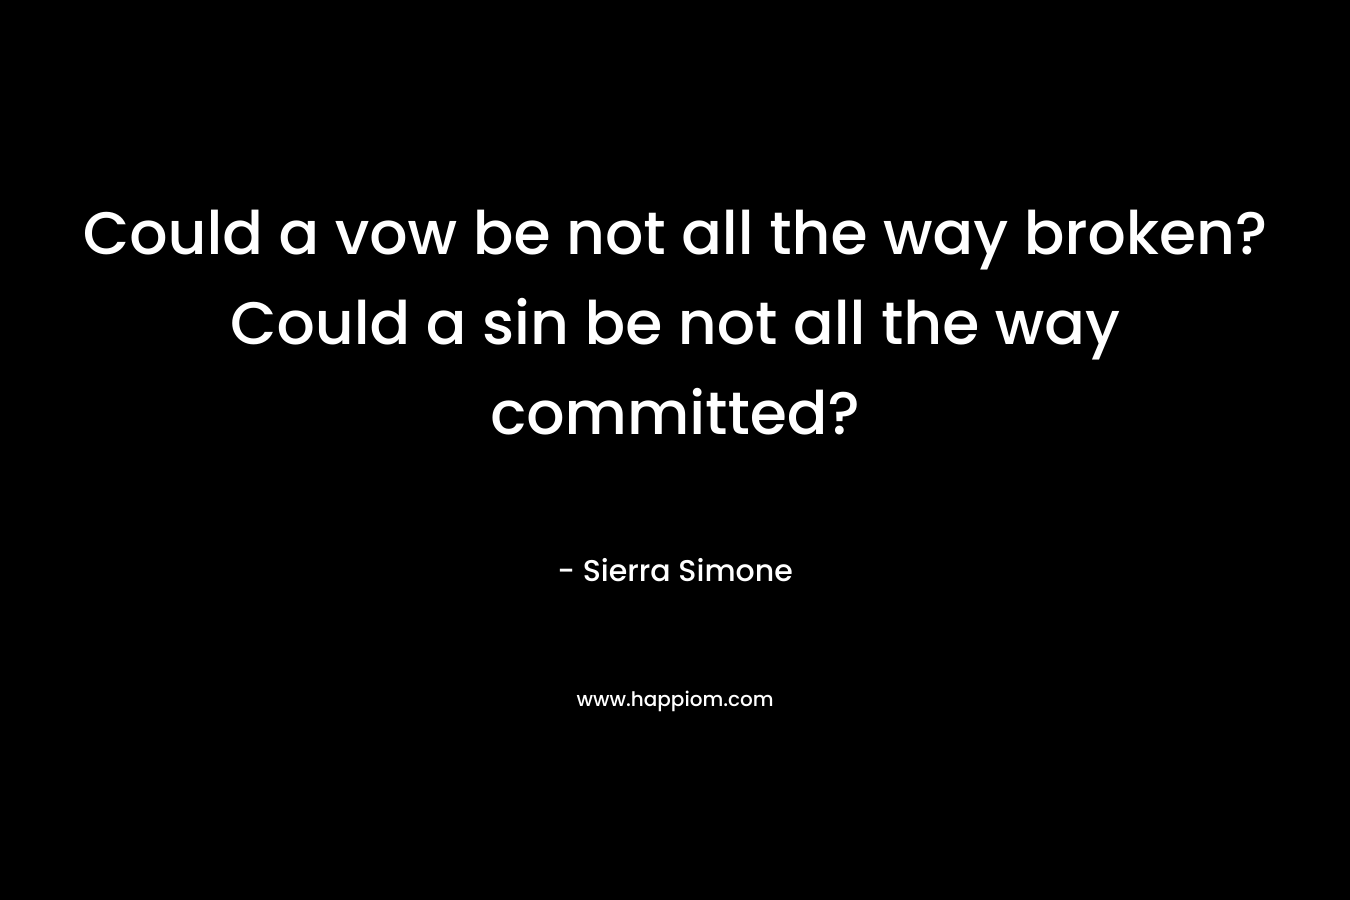 Could a vow be not all the way broken? Could a sin be not all the way committed?